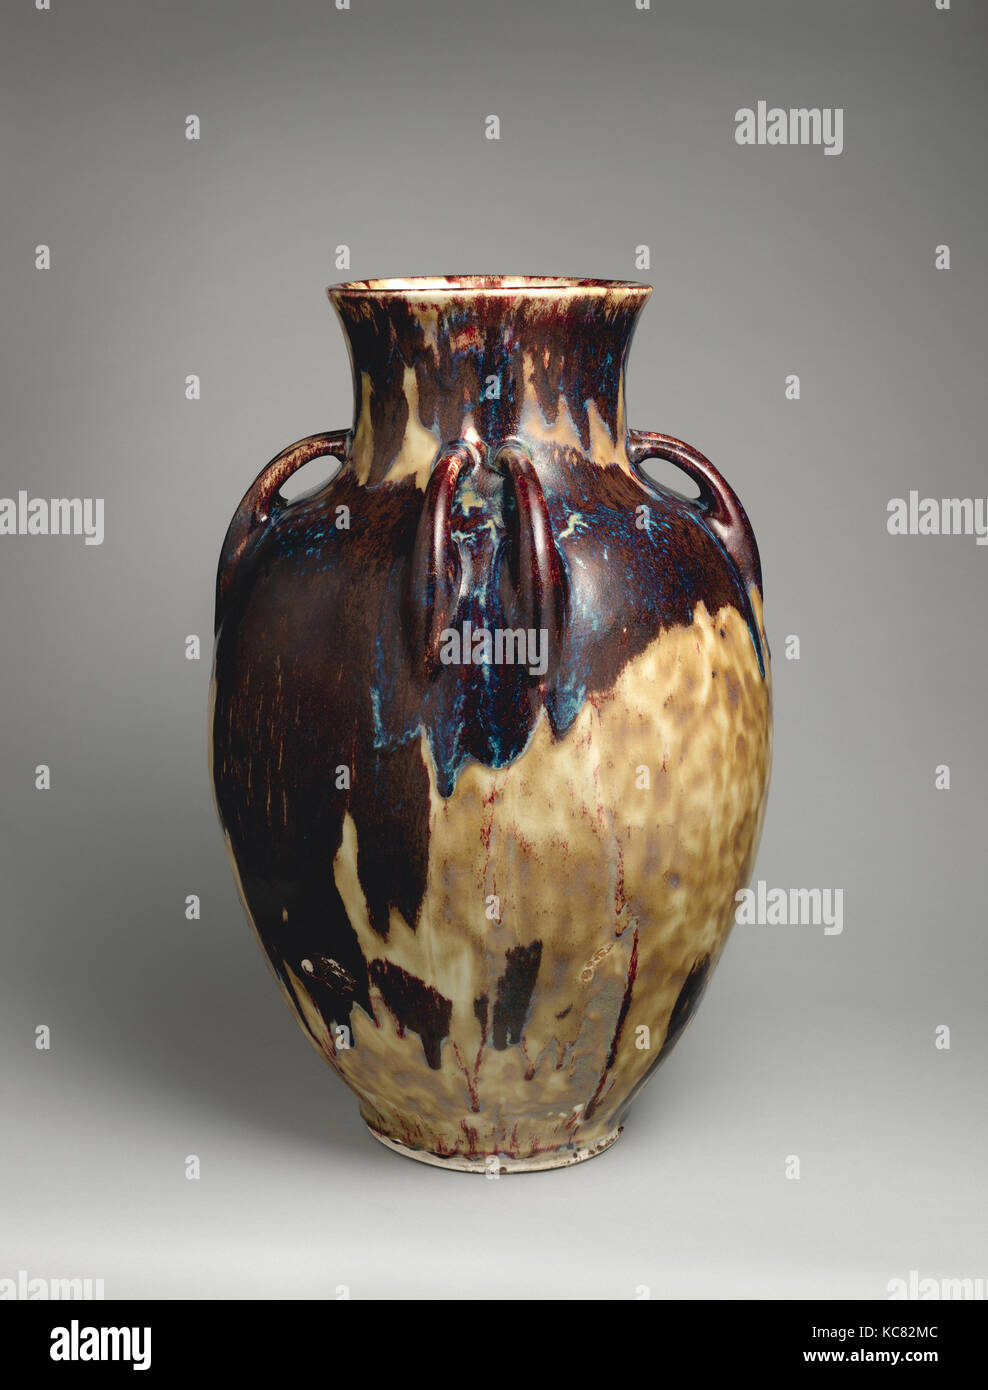 Monumental vase, ca. 1890, French, Choisy-le-Roi, Porcelain, Overall (confirmed): 29 1/2 × 19 1/4 × 19 1/4 in., 71.3lb. (74.9 Stock Photo